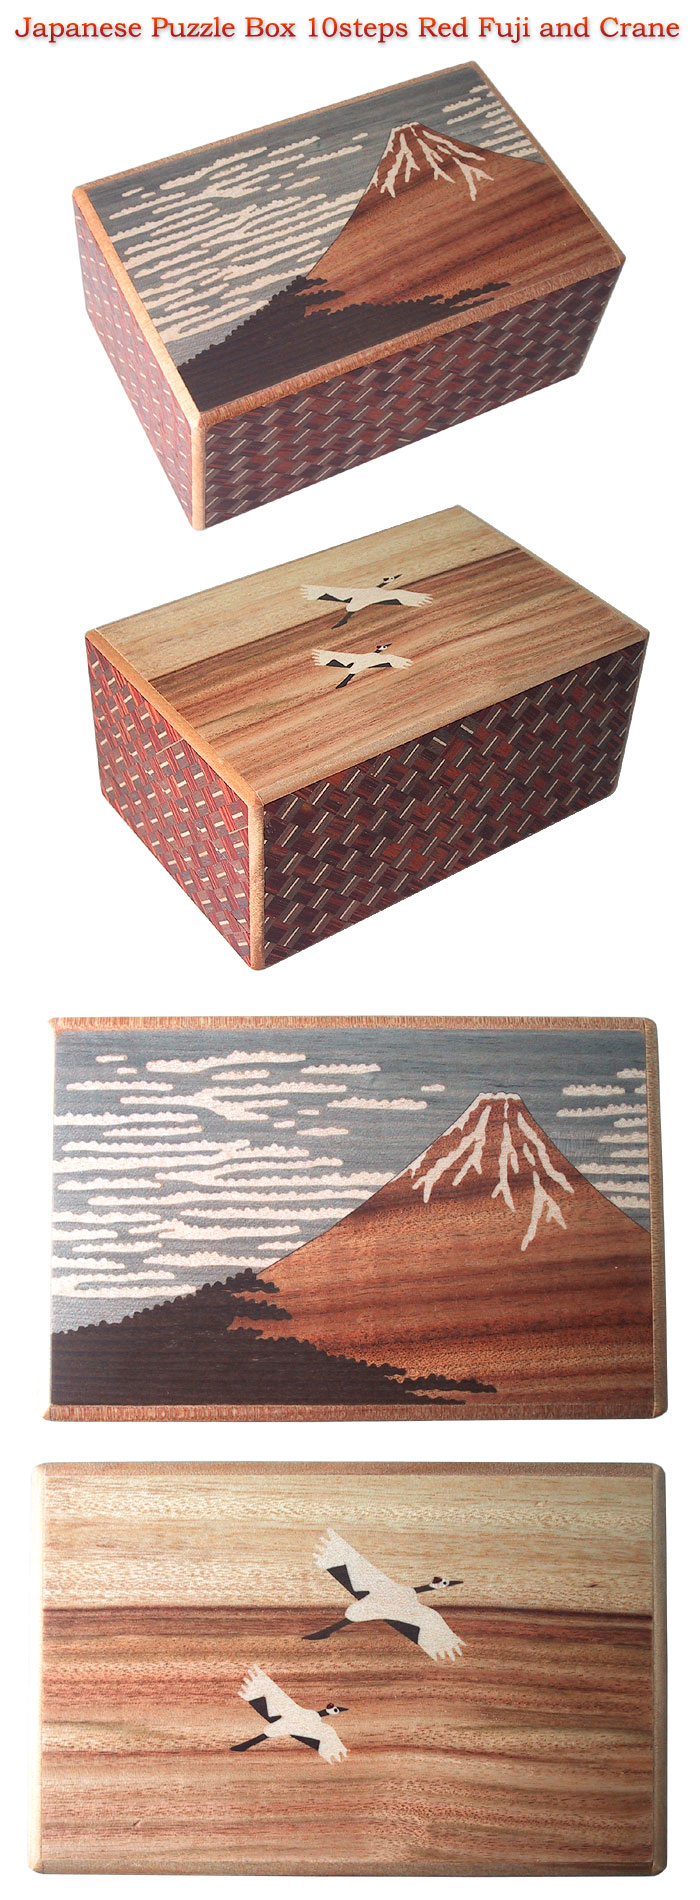 Japanese Puzzle box 10steps "Red Fuji and Crane"